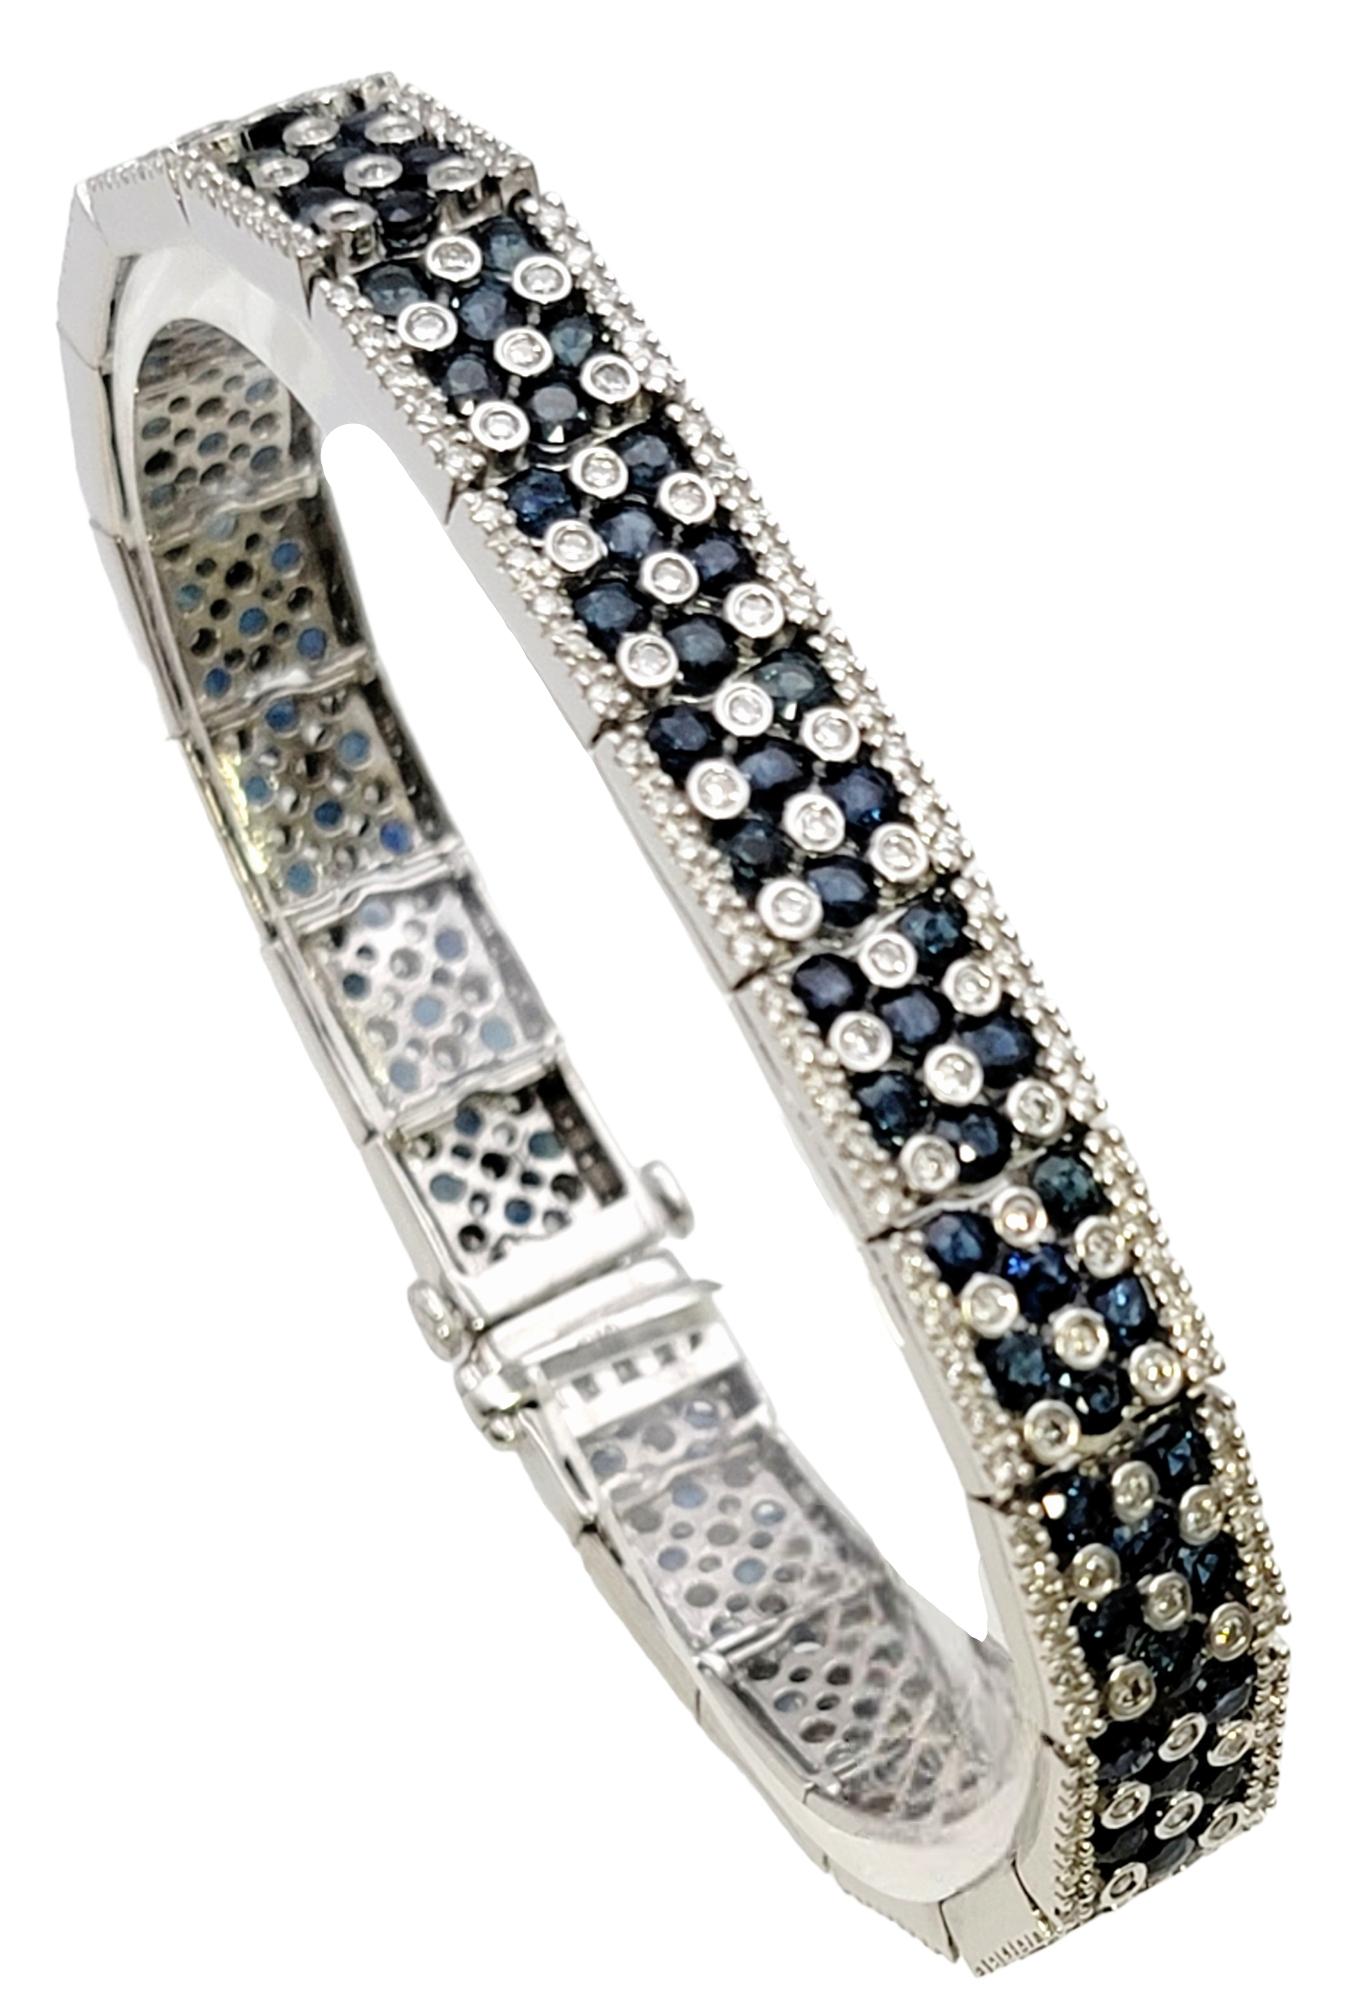 Length: 7 Inches

This dazzling diamond and sapphire line bracelet absolutely lights up the wrist! This incredible piece absolutely wows with its bright blue sapphires and icy white diamonds, shimmering magnificently in the light. 

This sleek